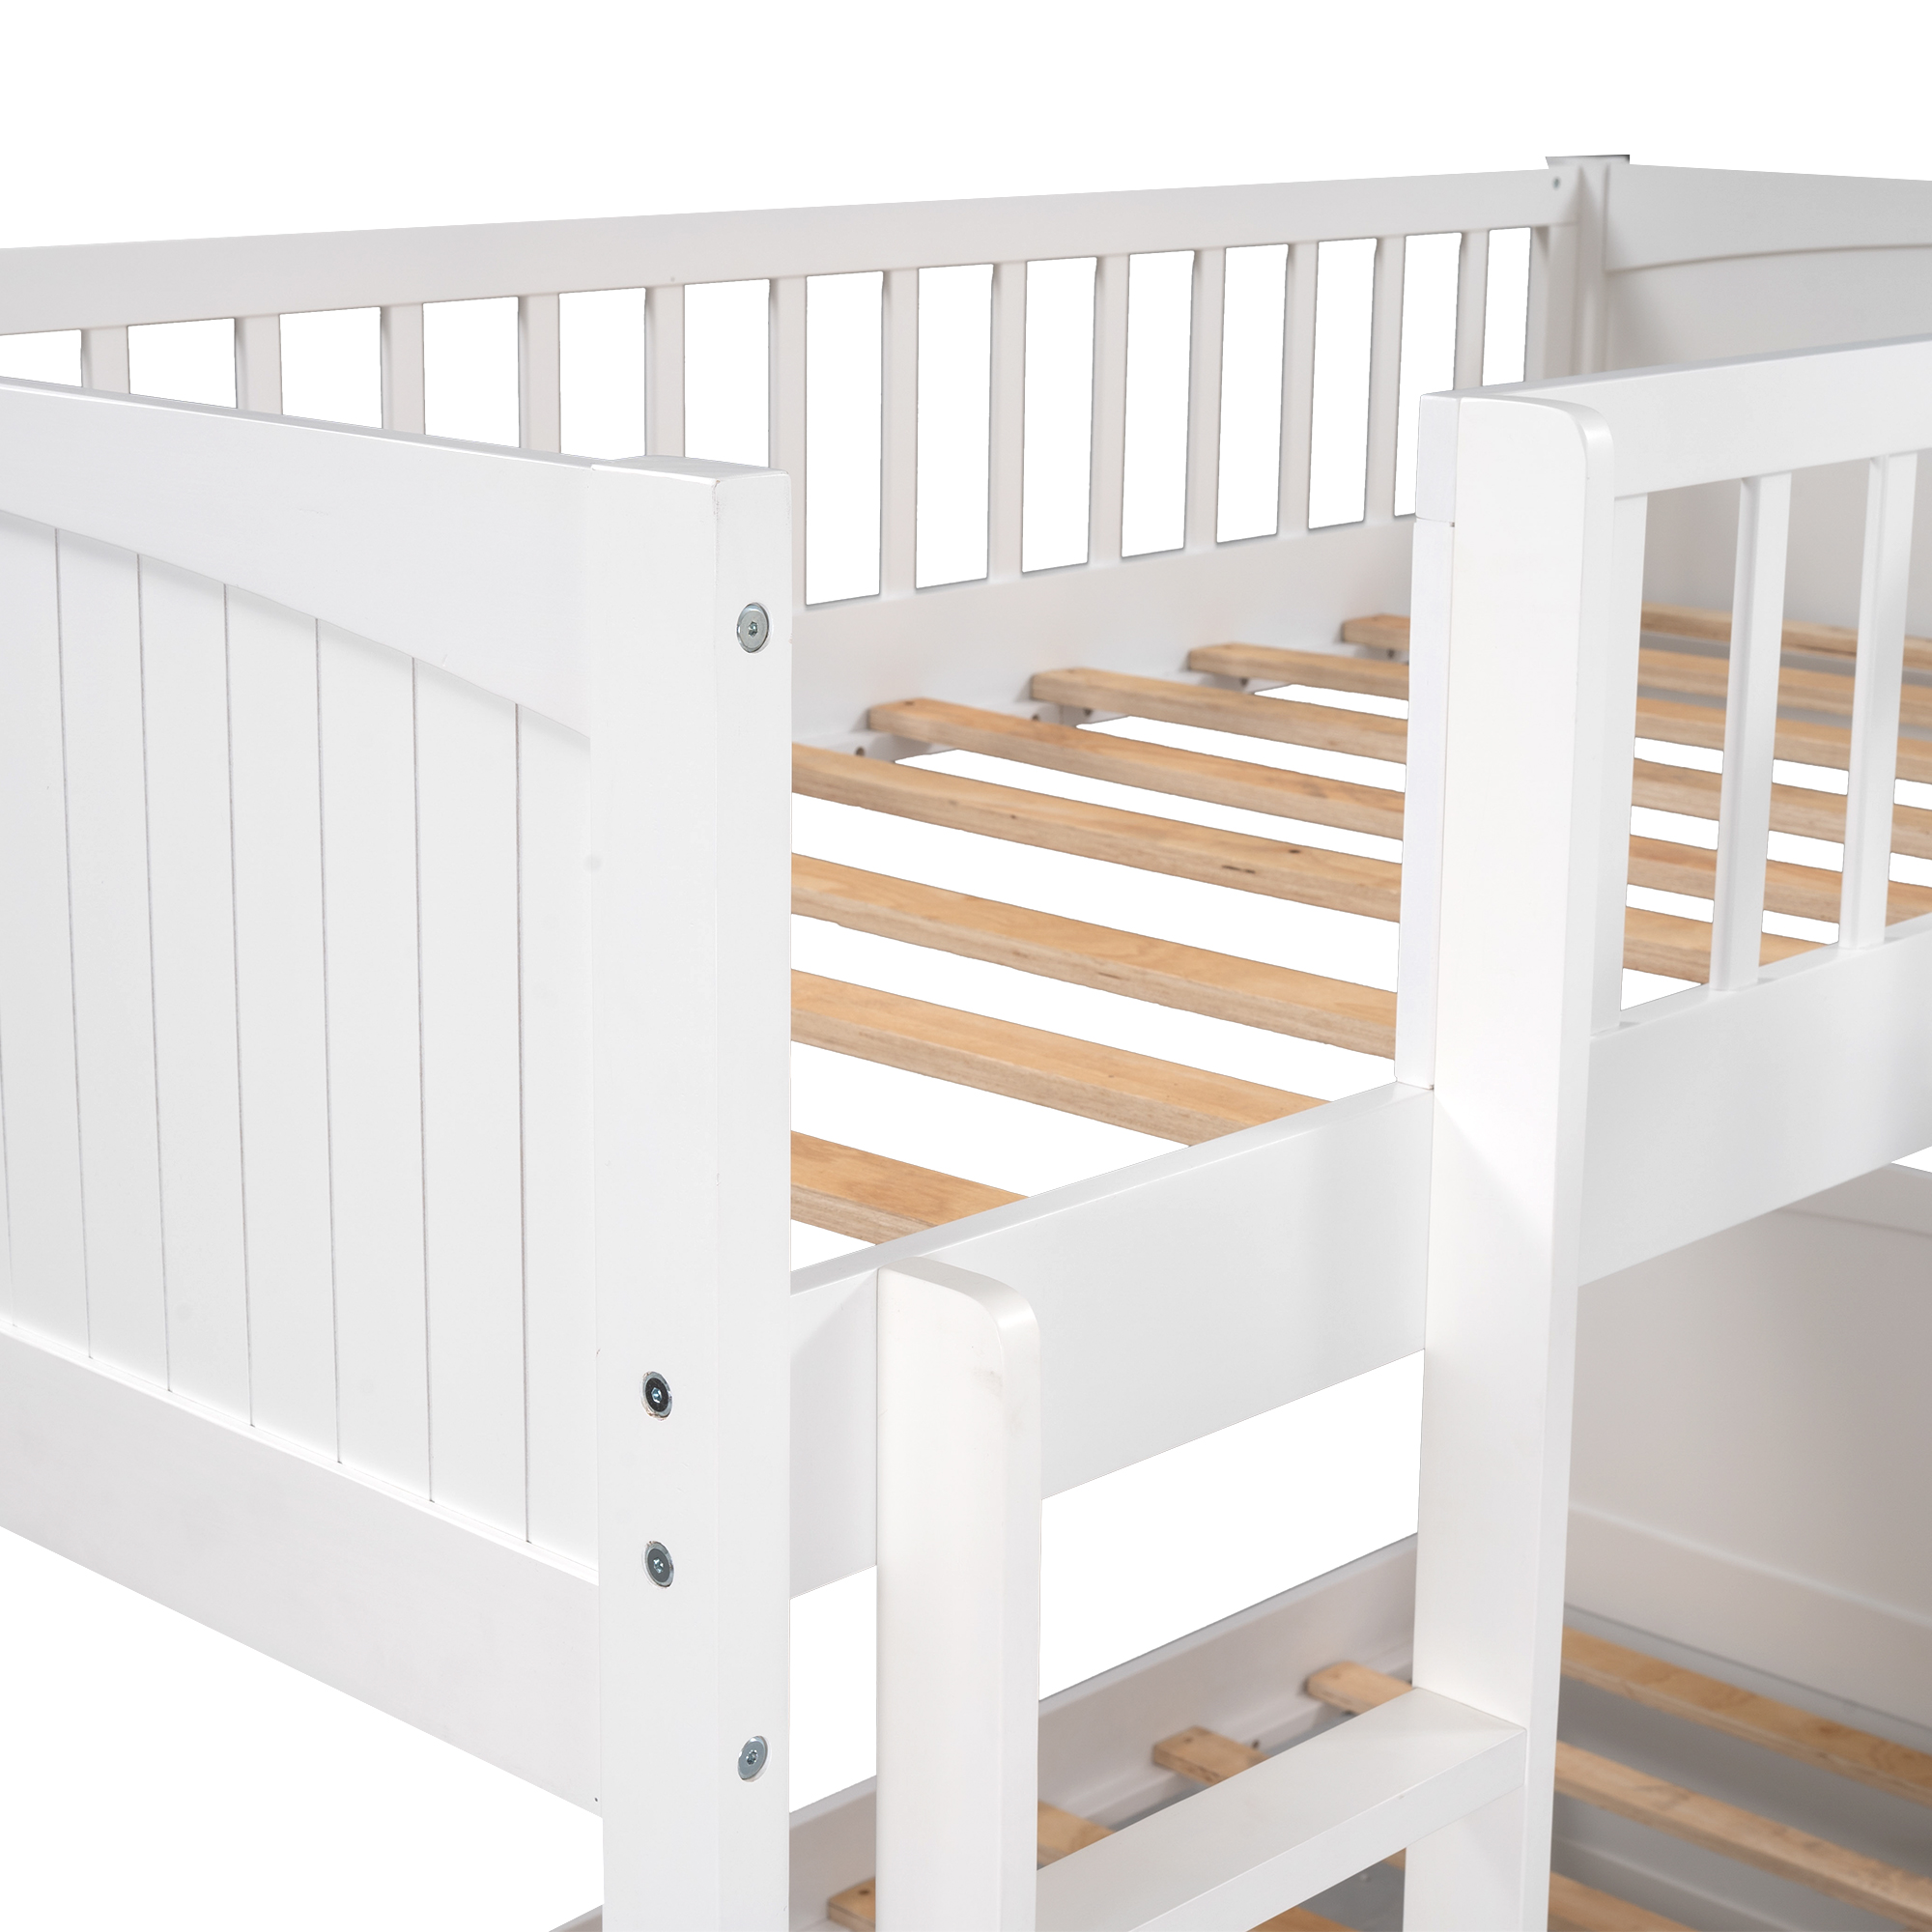 Euroco Wood Bunk Bed Storage, Twin-over-Twin-over-Twin for Children's Bedroom, White - image 11 of 12